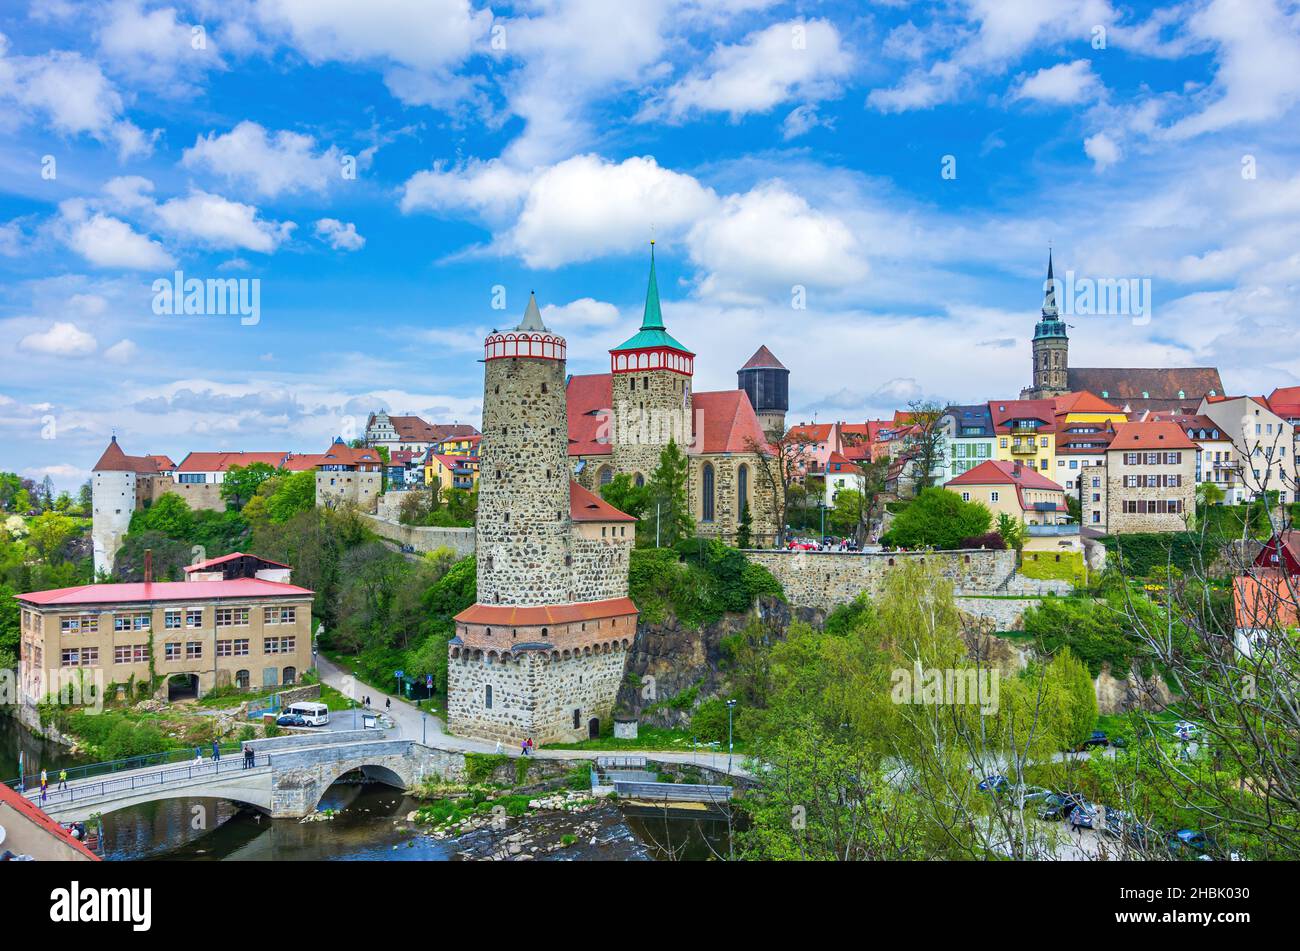 Bautzen, Upper Lusatia, Saxony, Germany: The well-known silhouette of the medieval Old Town with the characteristic buildings. Stock Photo